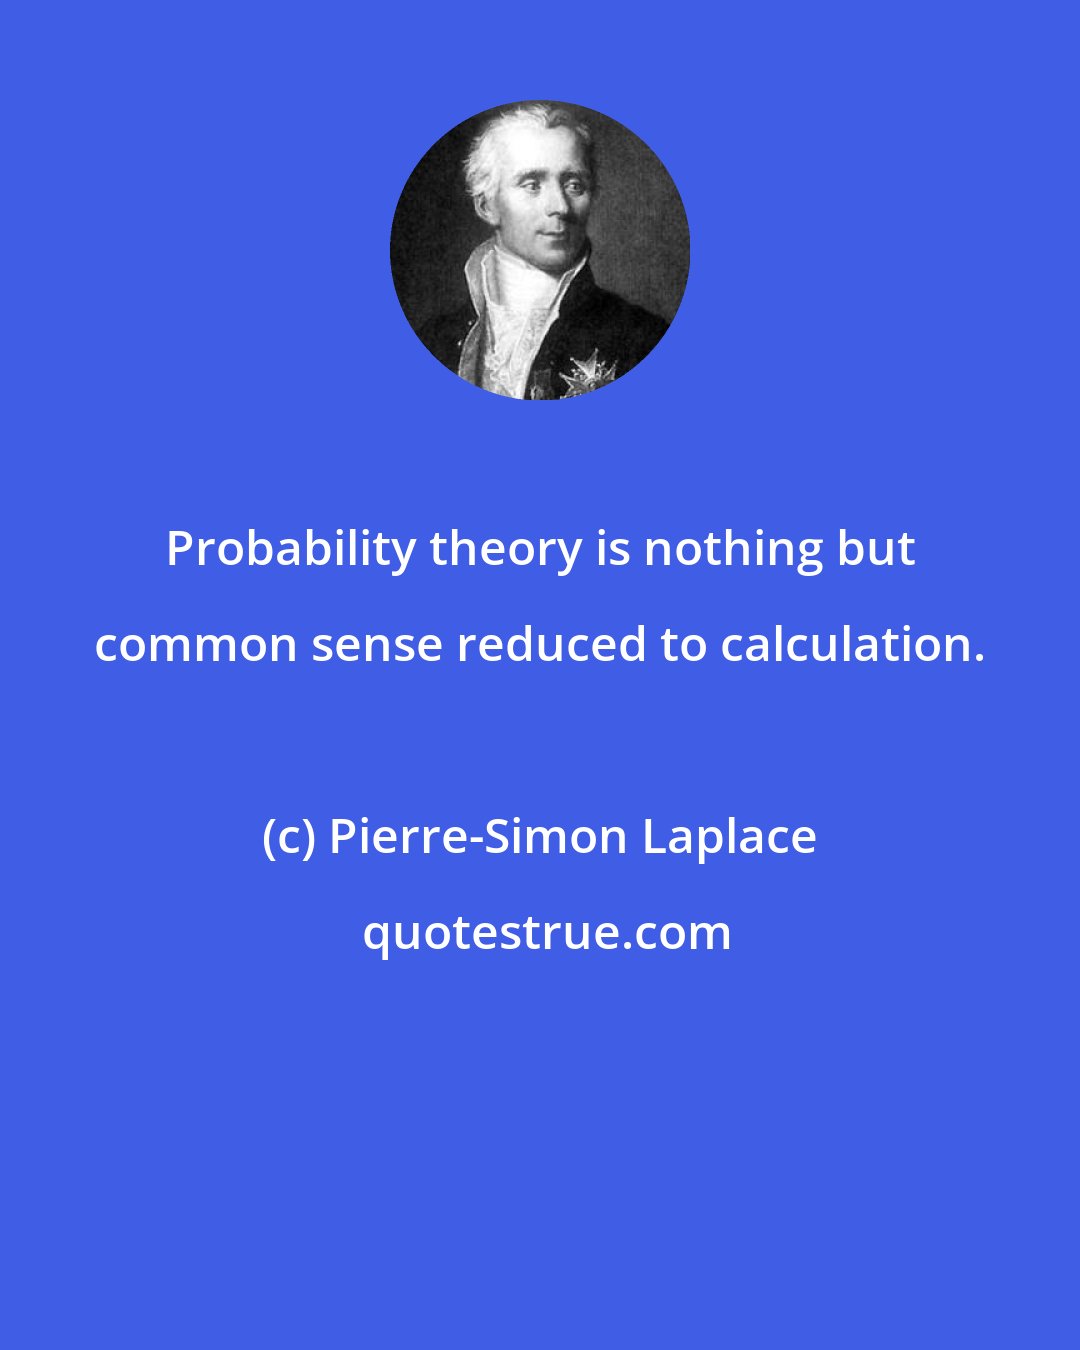 Pierre-Simon Laplace: Probability theory is nothing but common sense reduced to calculation.